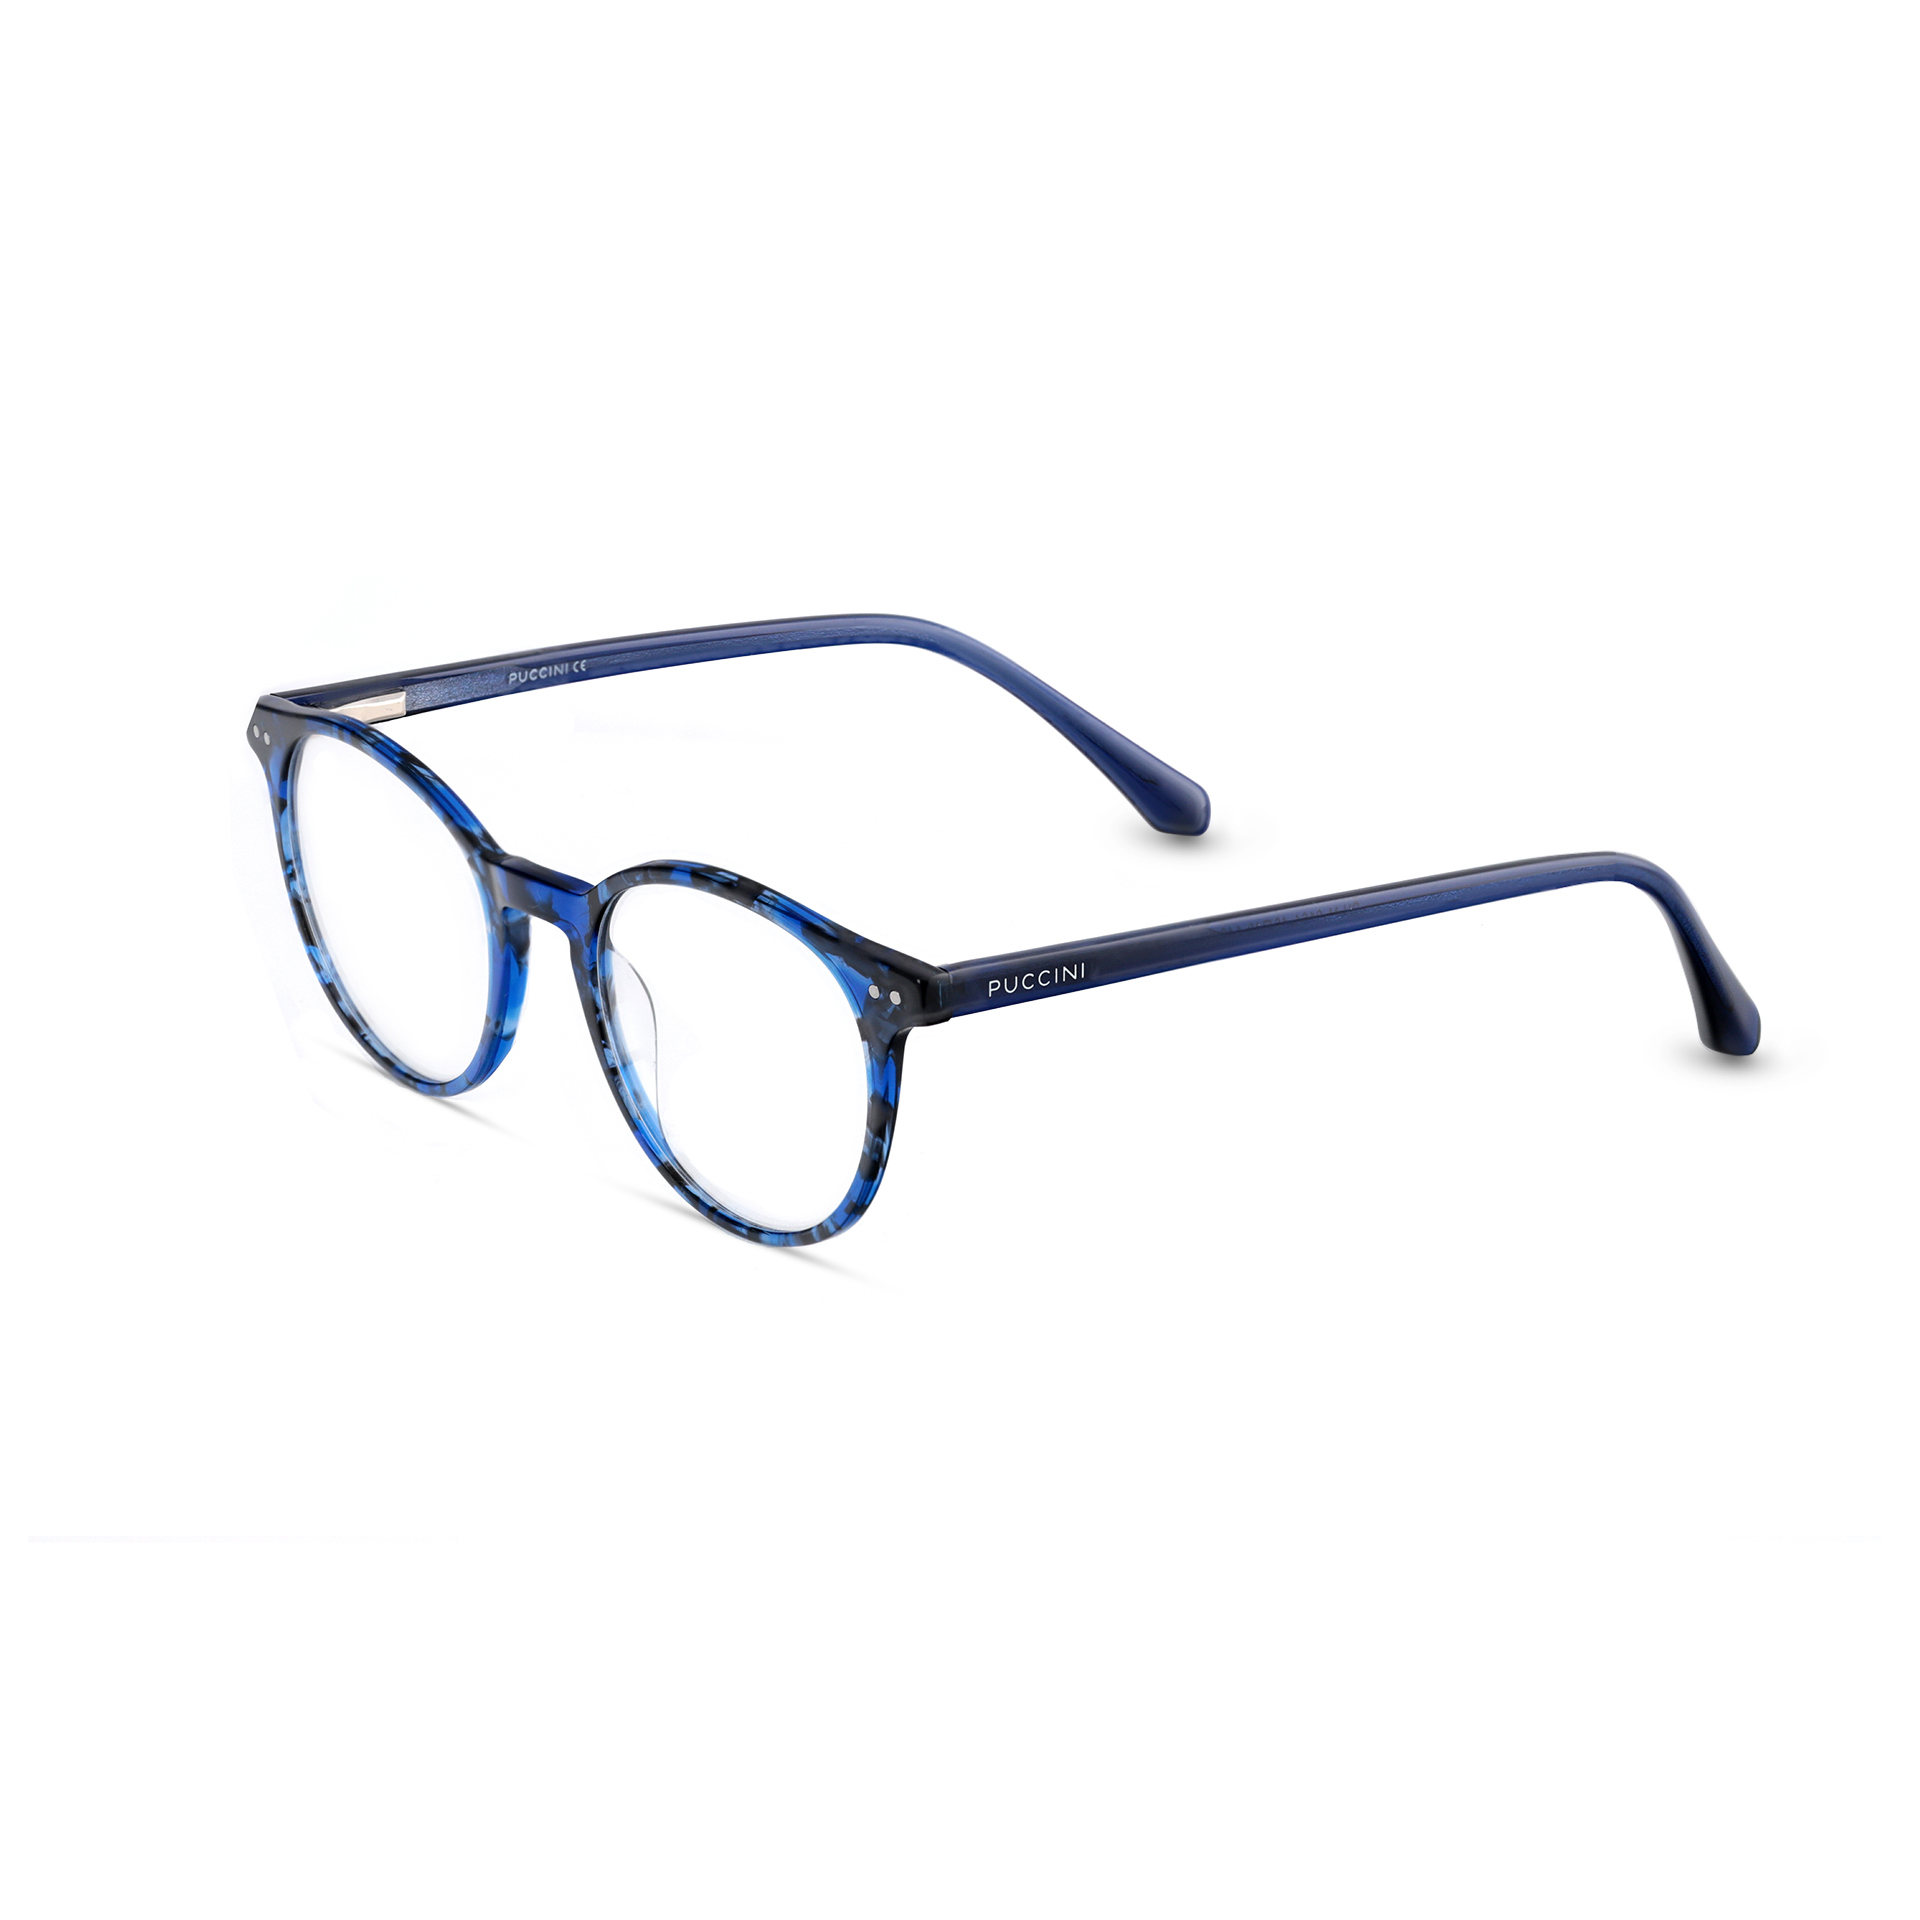 product photography of glasses frames - product photography - Pixterior.com photo studio